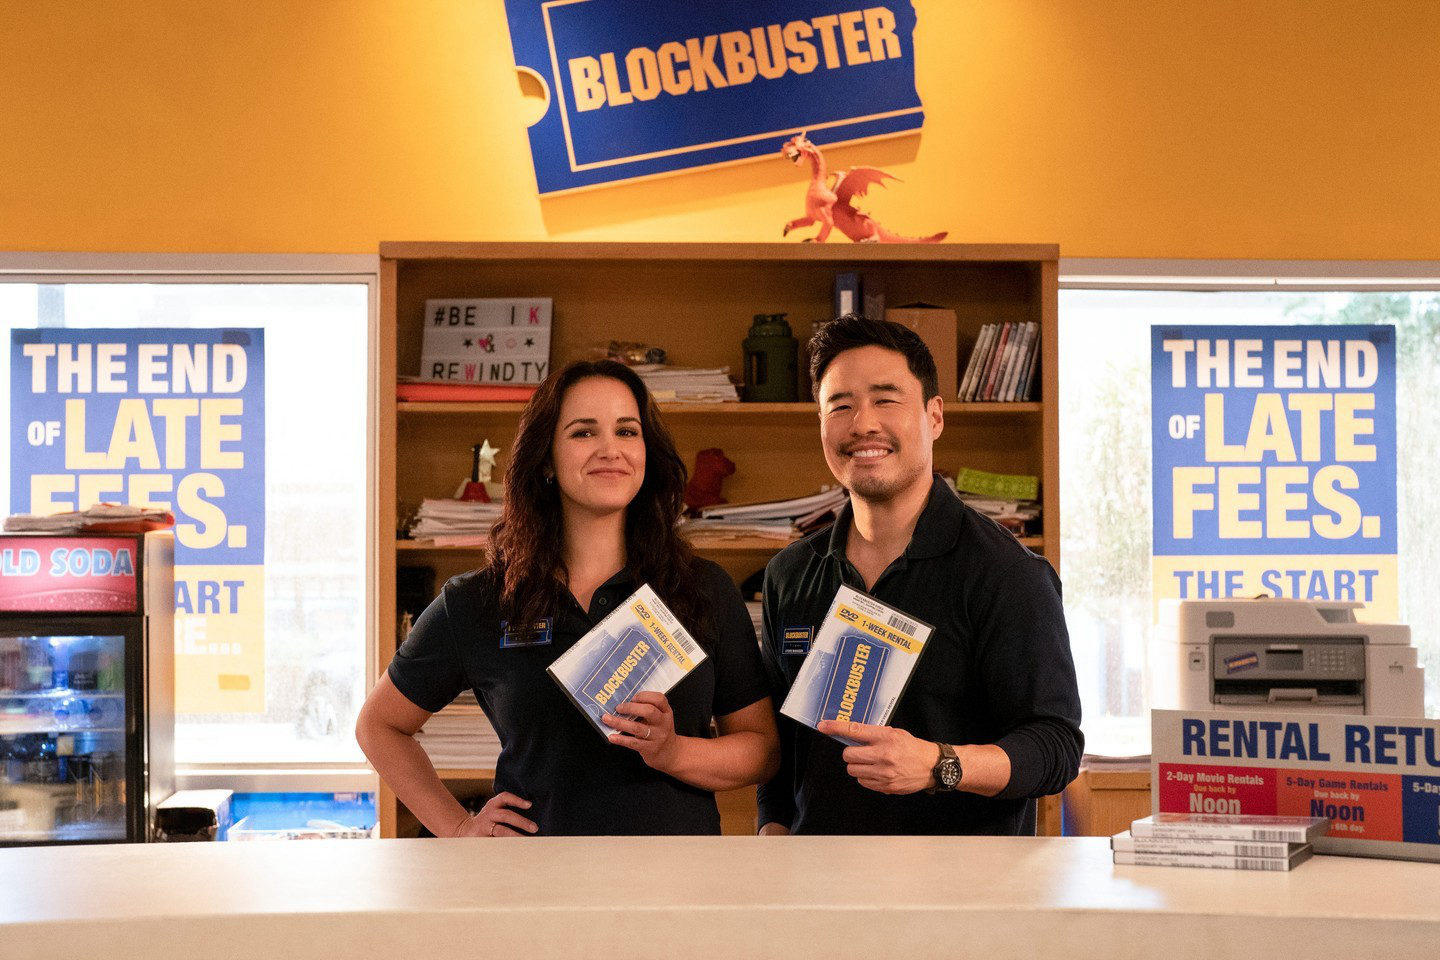 Rotten Tomatoes - Randall Park, Melissa Fumero, and the cast of #Blockbuster share 9 things to know